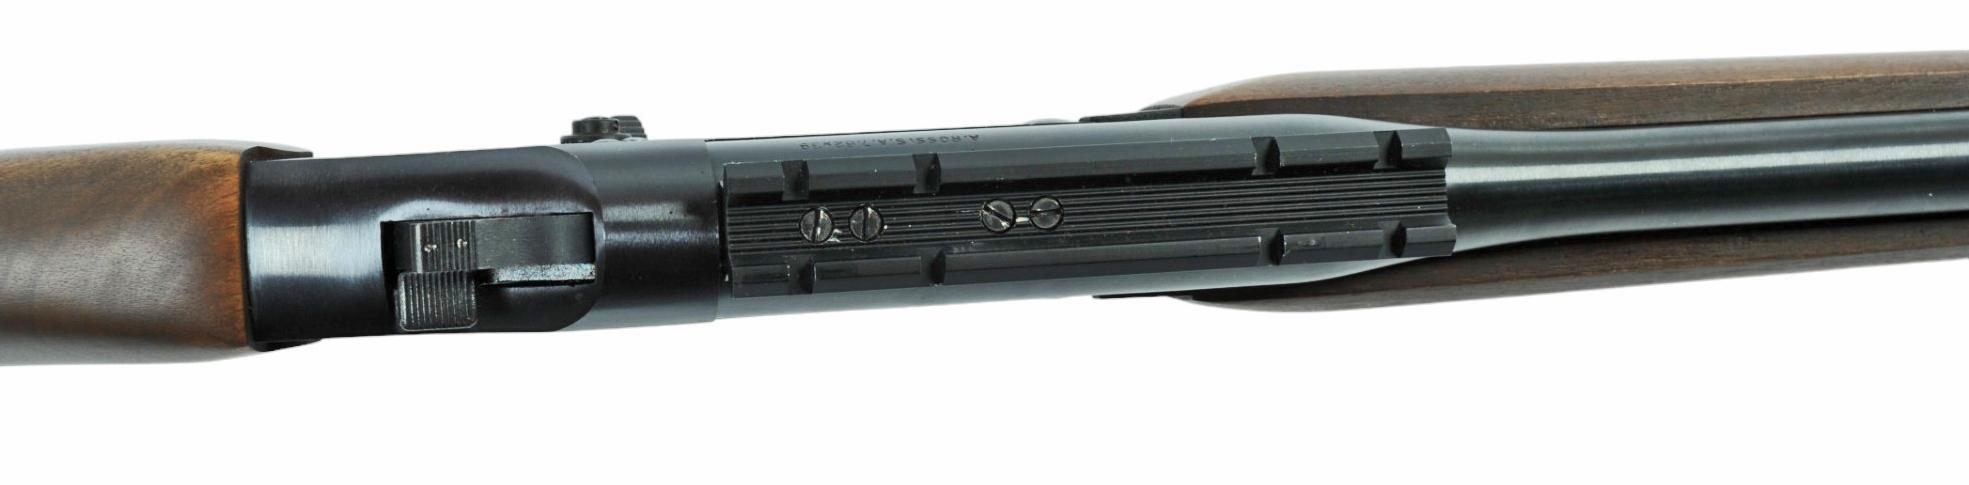 Rossi SA 7.62x39 Break-action Rifle FFL Required: ACO16794  (KDN1)